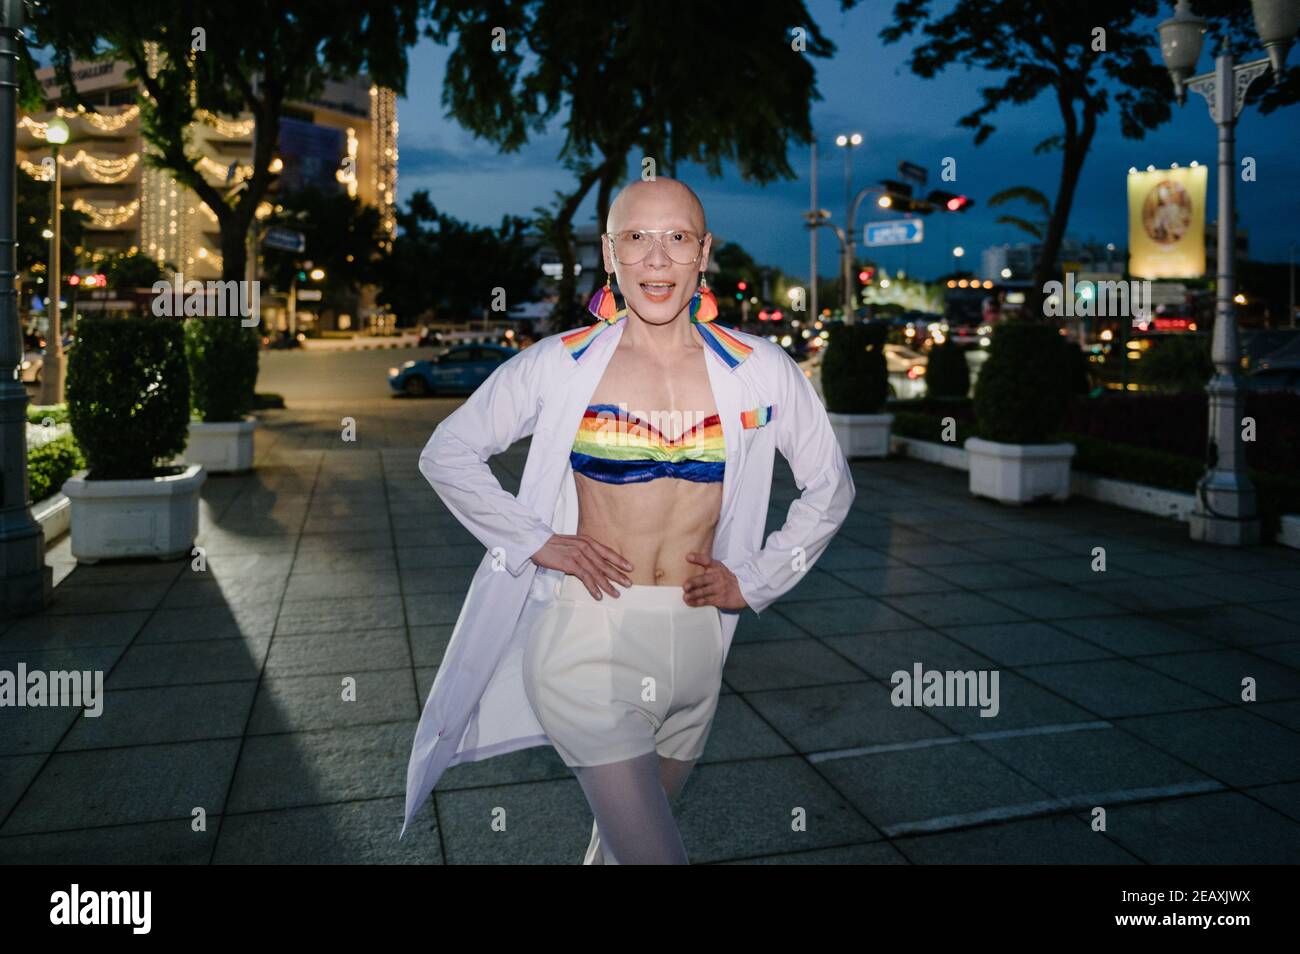 An Asian Queer person wearing a medical doctor white uniform with rainbow colors items to protest against discrimination of LGBTQ community members. Stock Photo